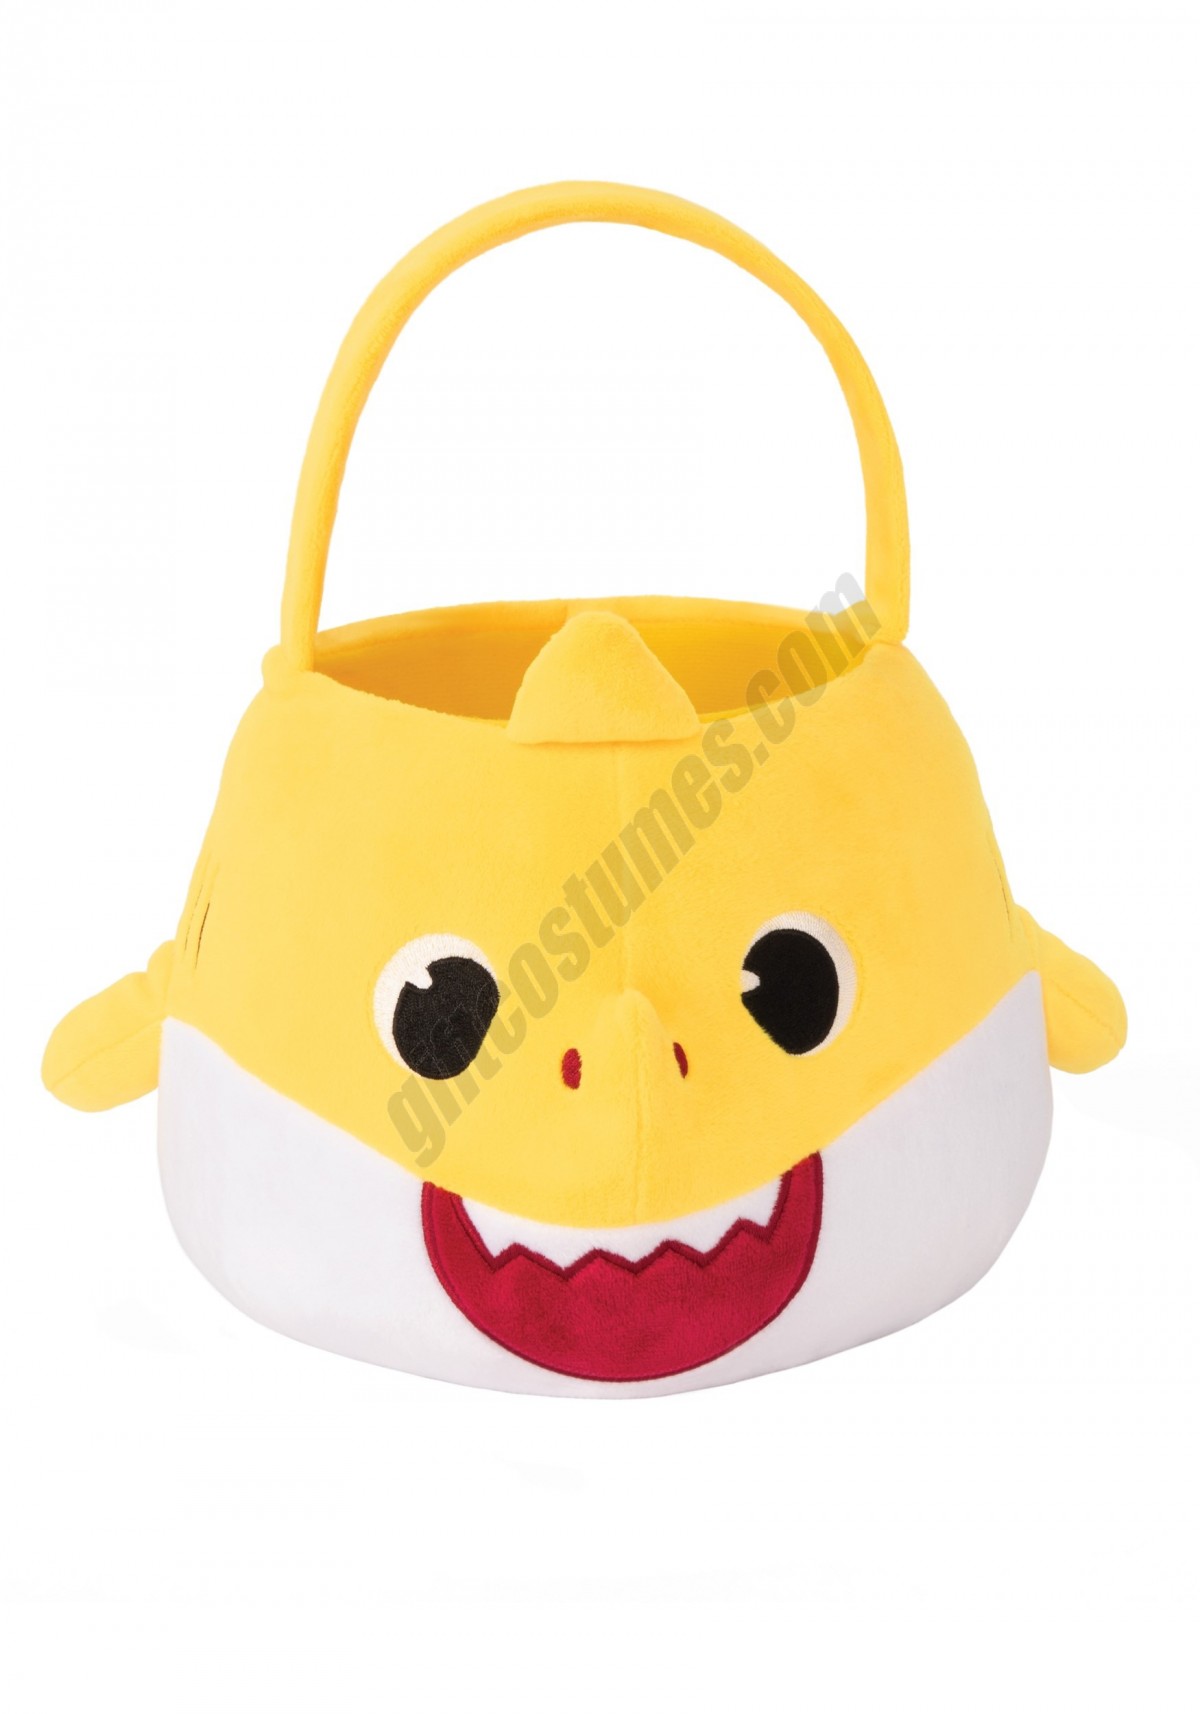 Baby Shark Treat Pail and Soundchip Promotions - -0